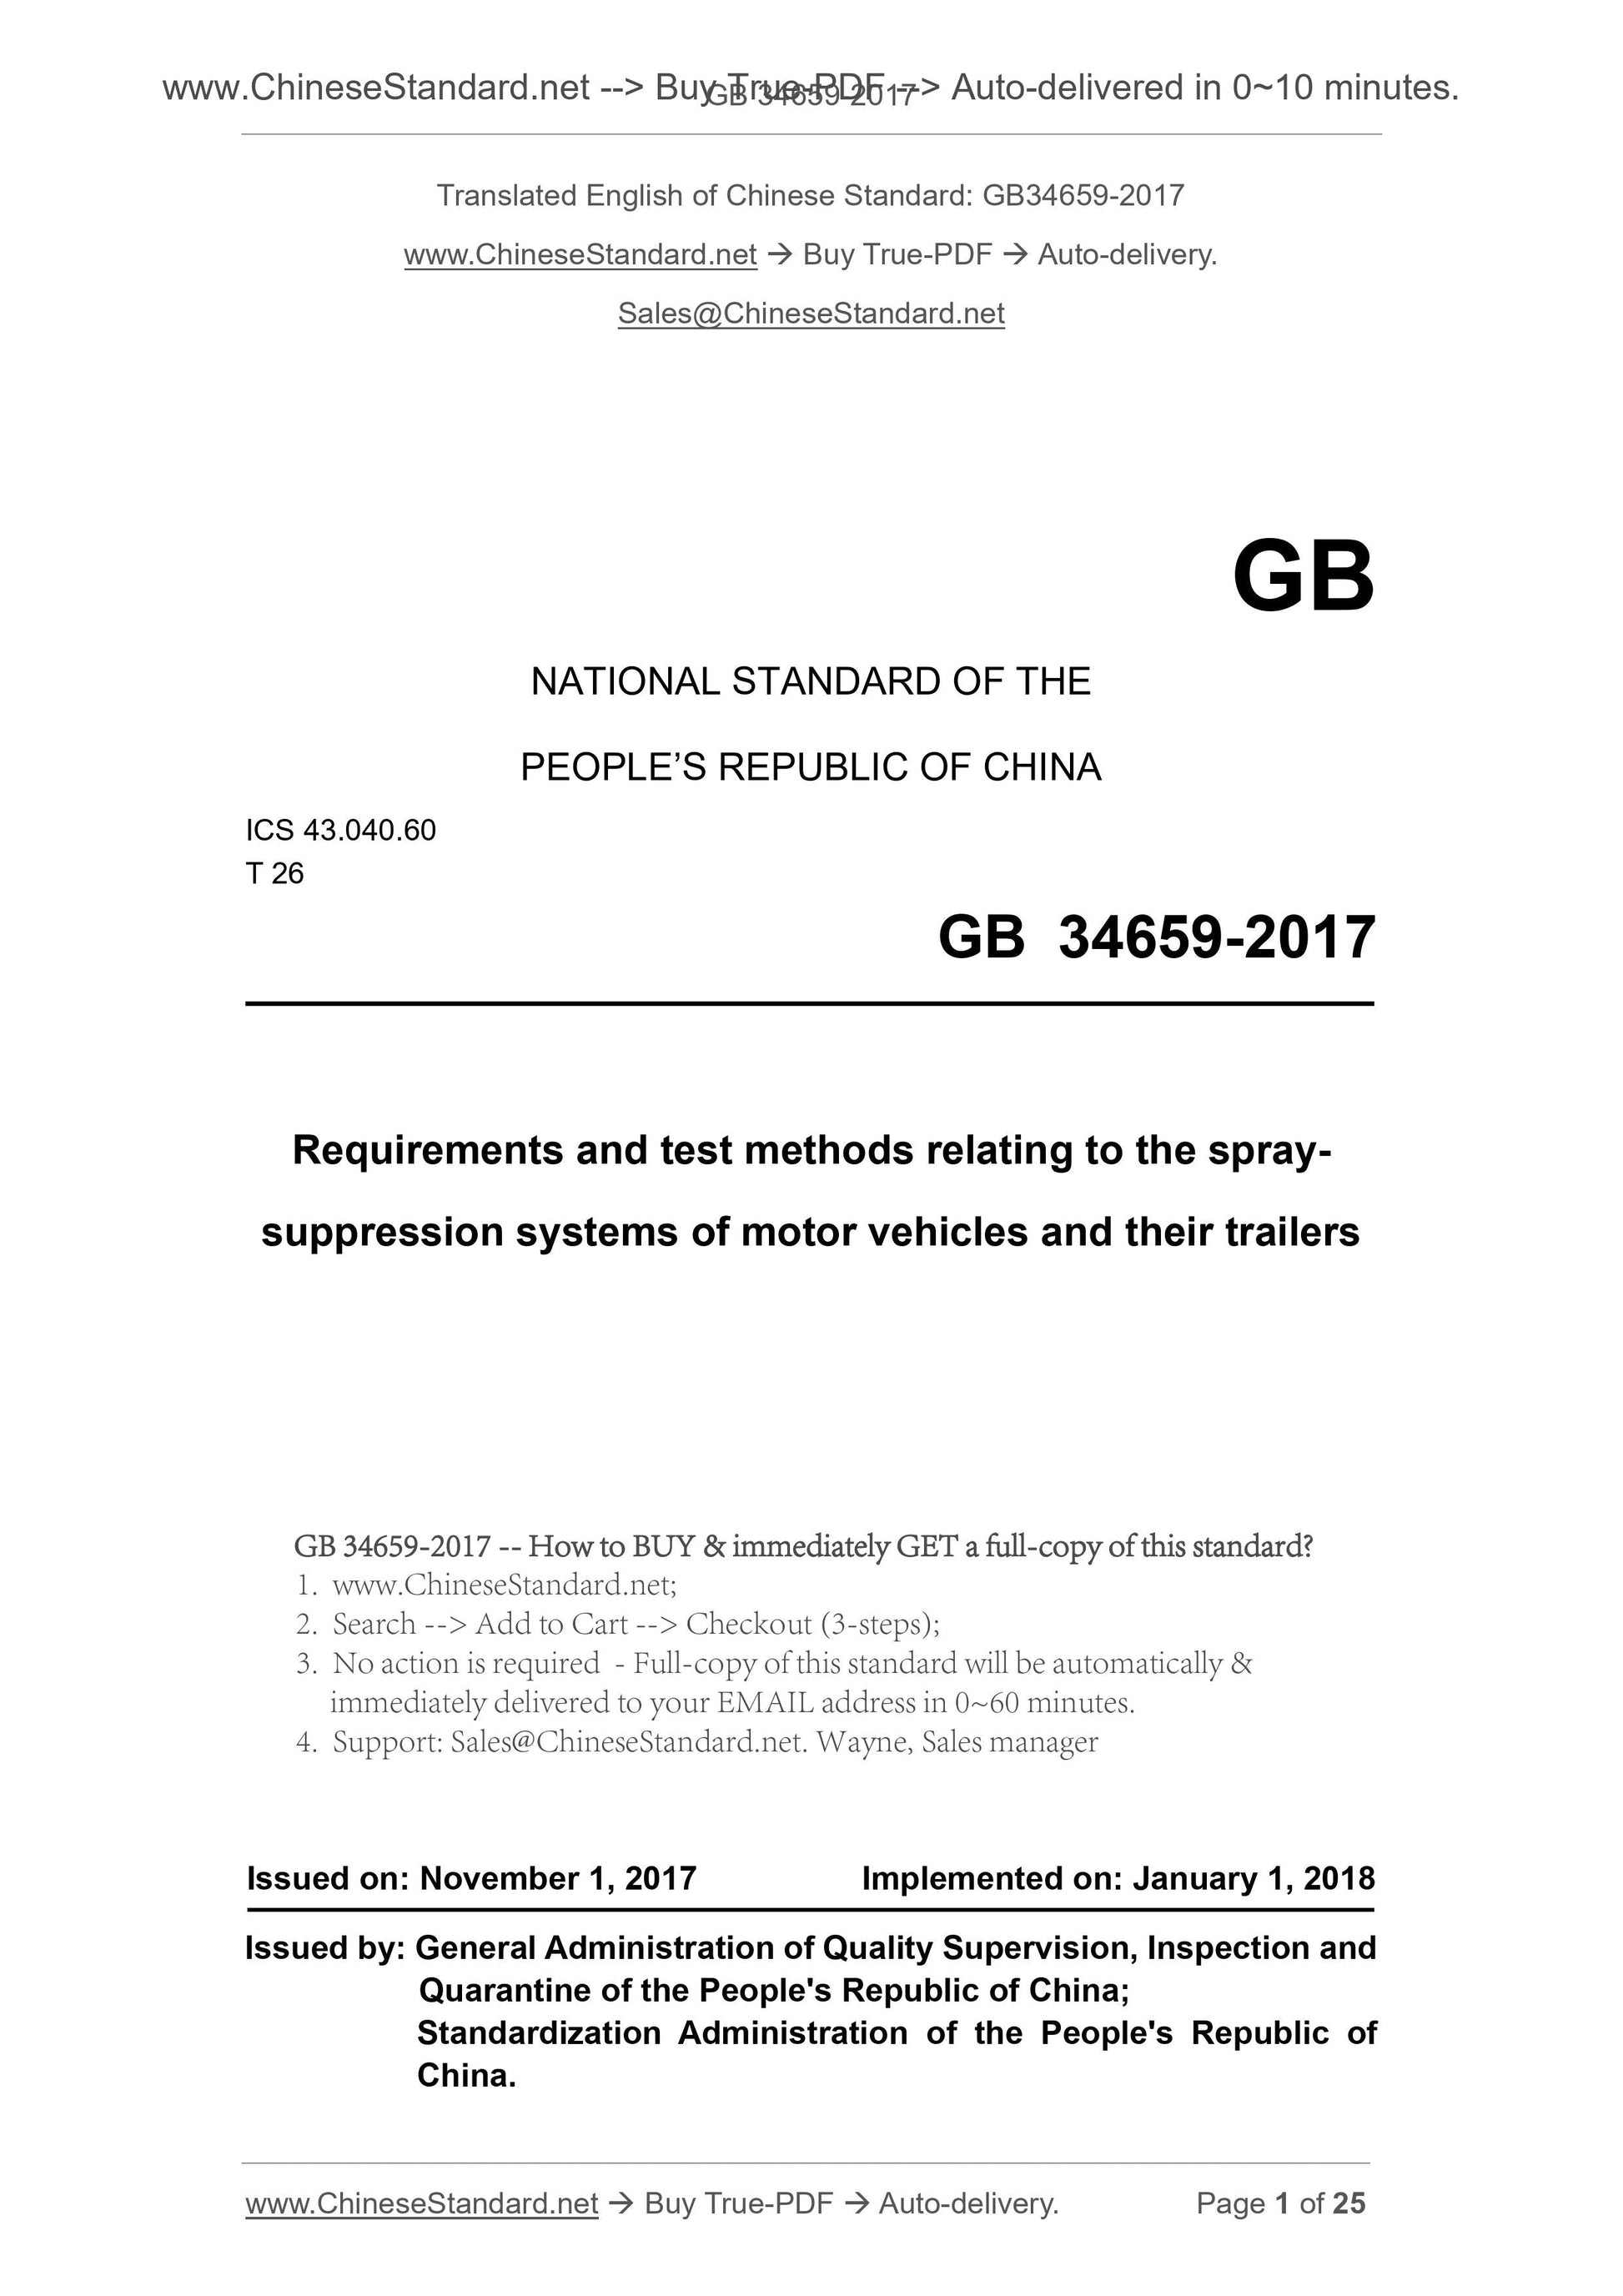 GB 34659-2017 Page 1